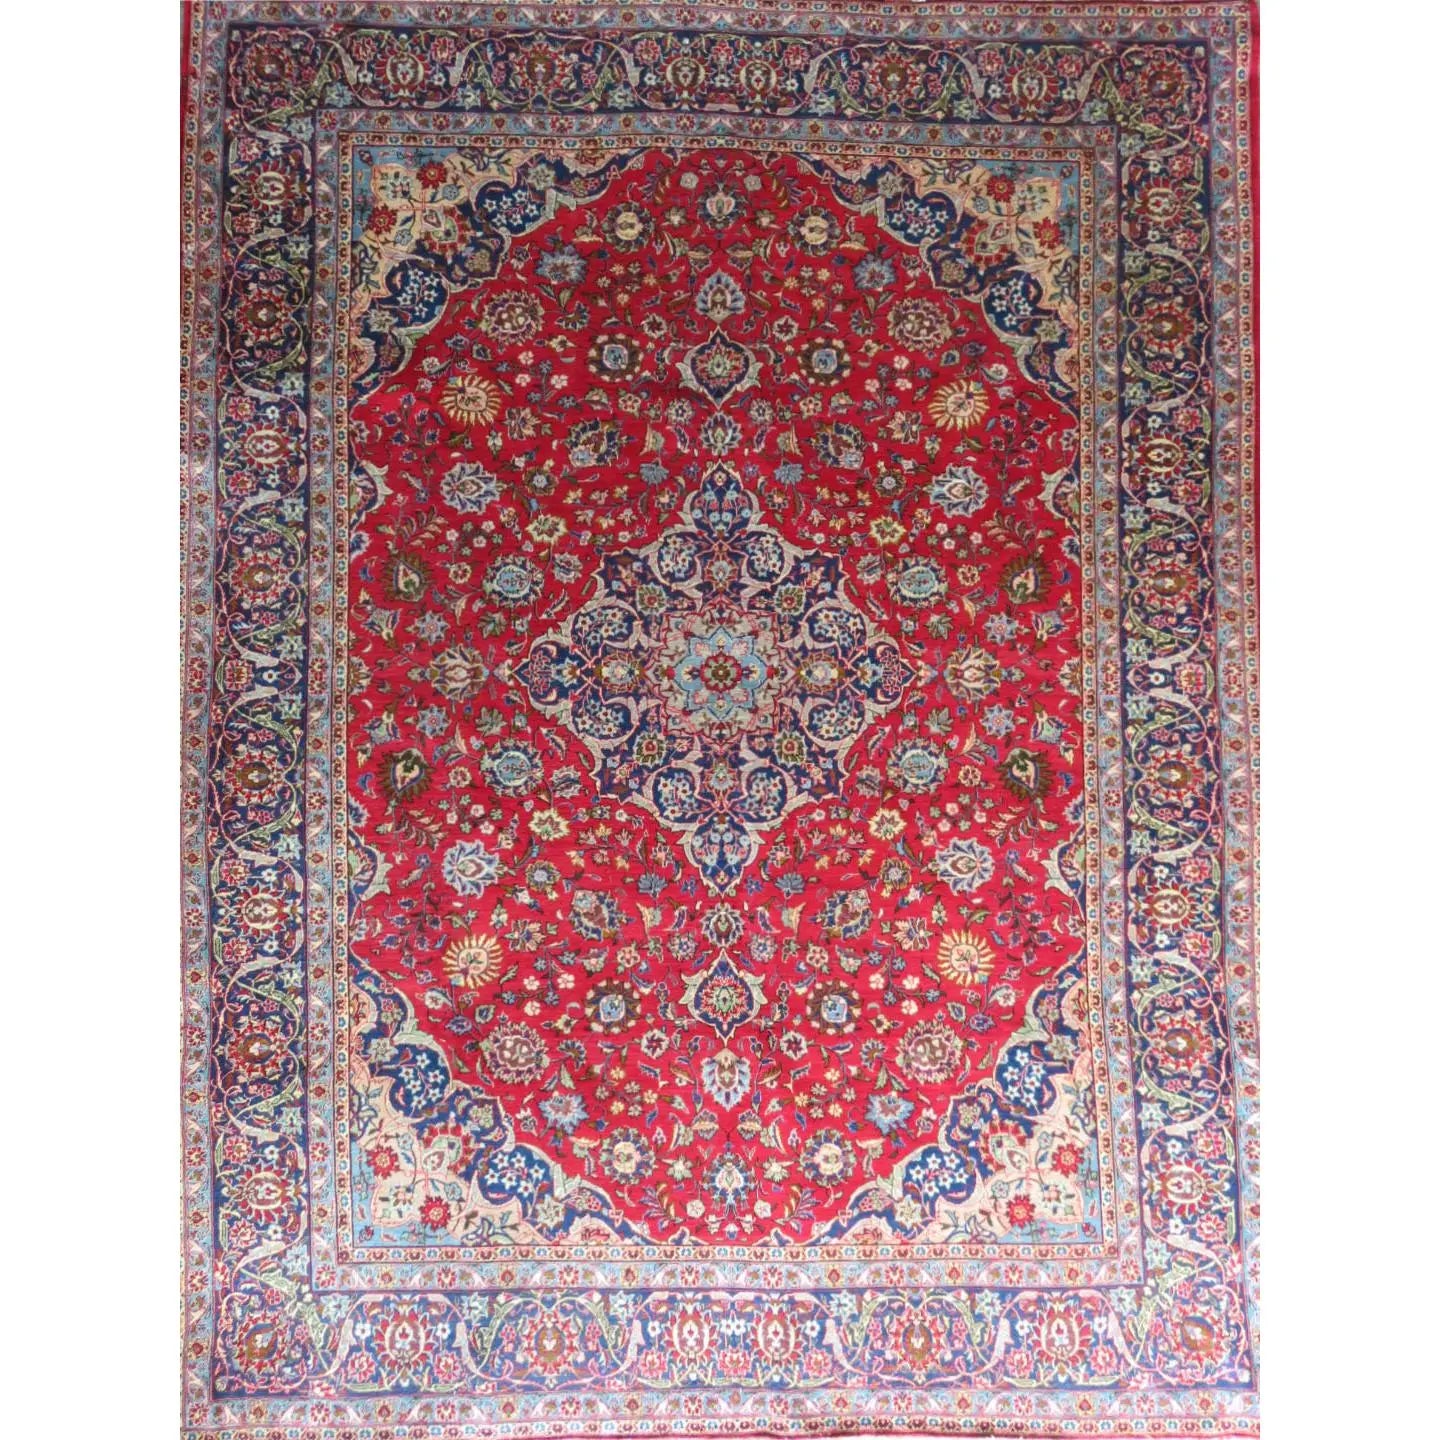 Hand-Knotted Persian Wool Rug _ Luxurious Vintage Design, 13'4" x 10'3", Artisan Crafted